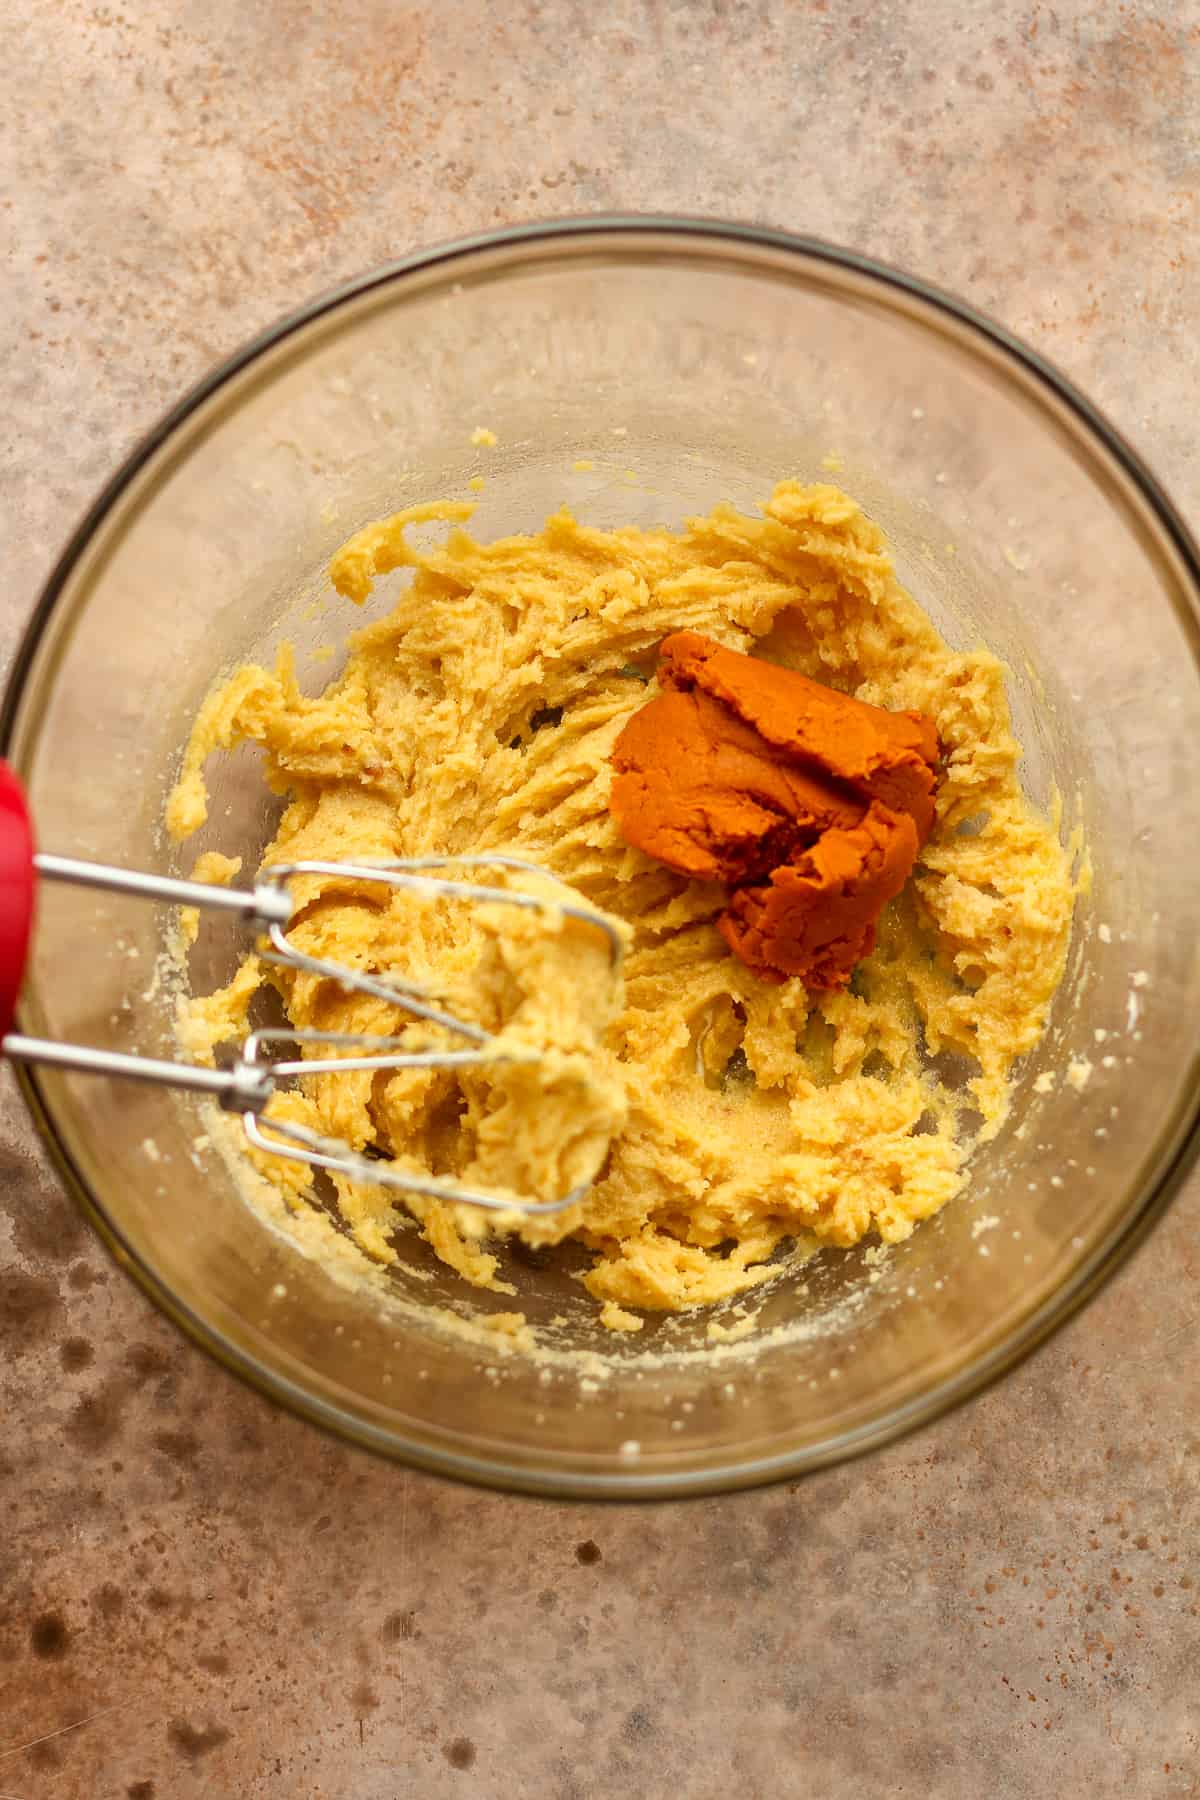 A bowl of the wet ingredients with some dry pumpkin mix.